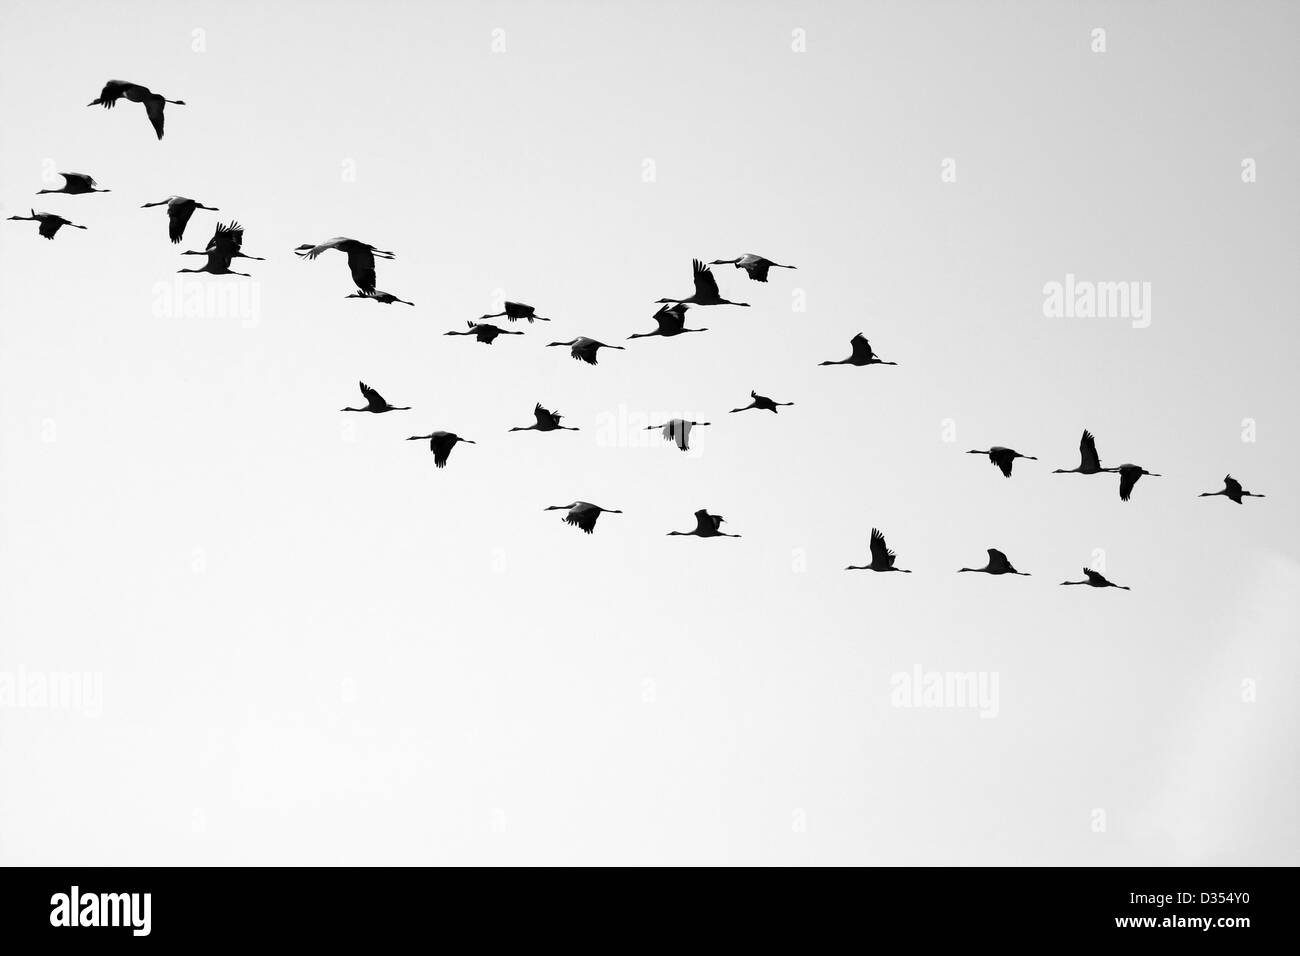 Silhouette of a flock of Grey Cranes (Grus grus), Israel, Hula Valley Stock Photo